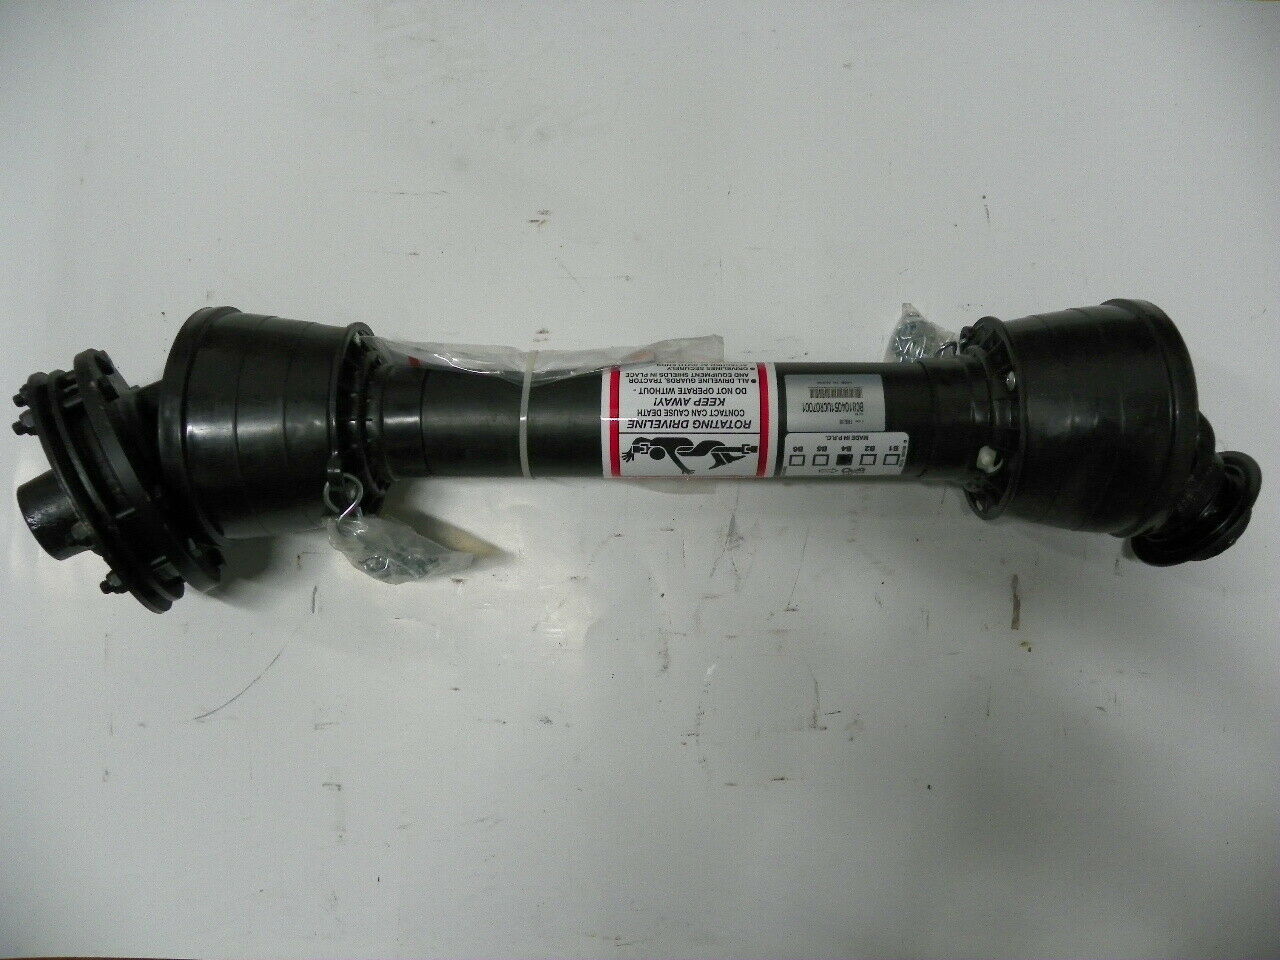 King Kutter 147122 Roto-tiller Pto Shaft With Slip Clutch. New, Replacement